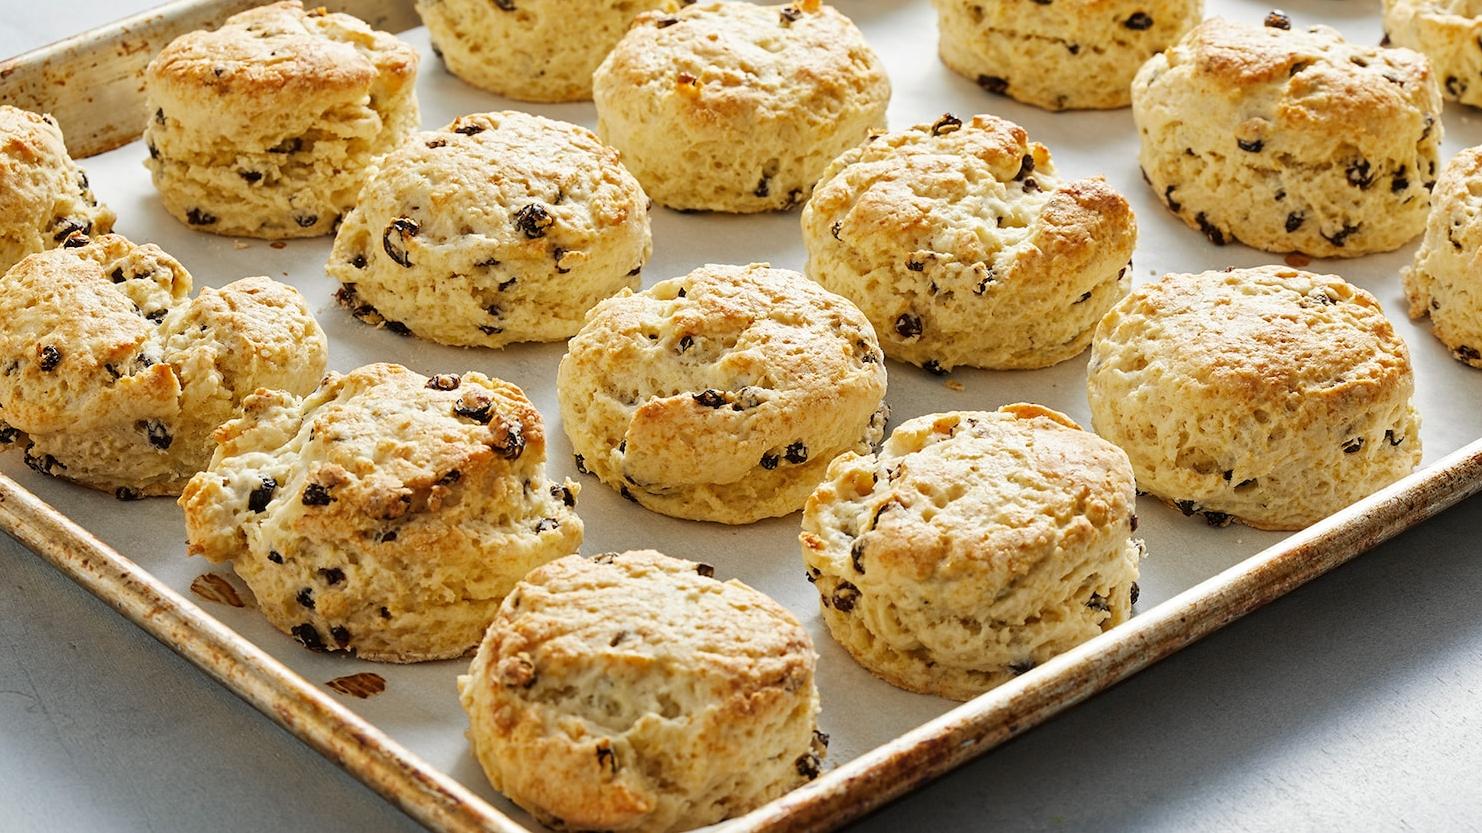  These English scones are perfect for a cozy afternoon tea with your loved ones.